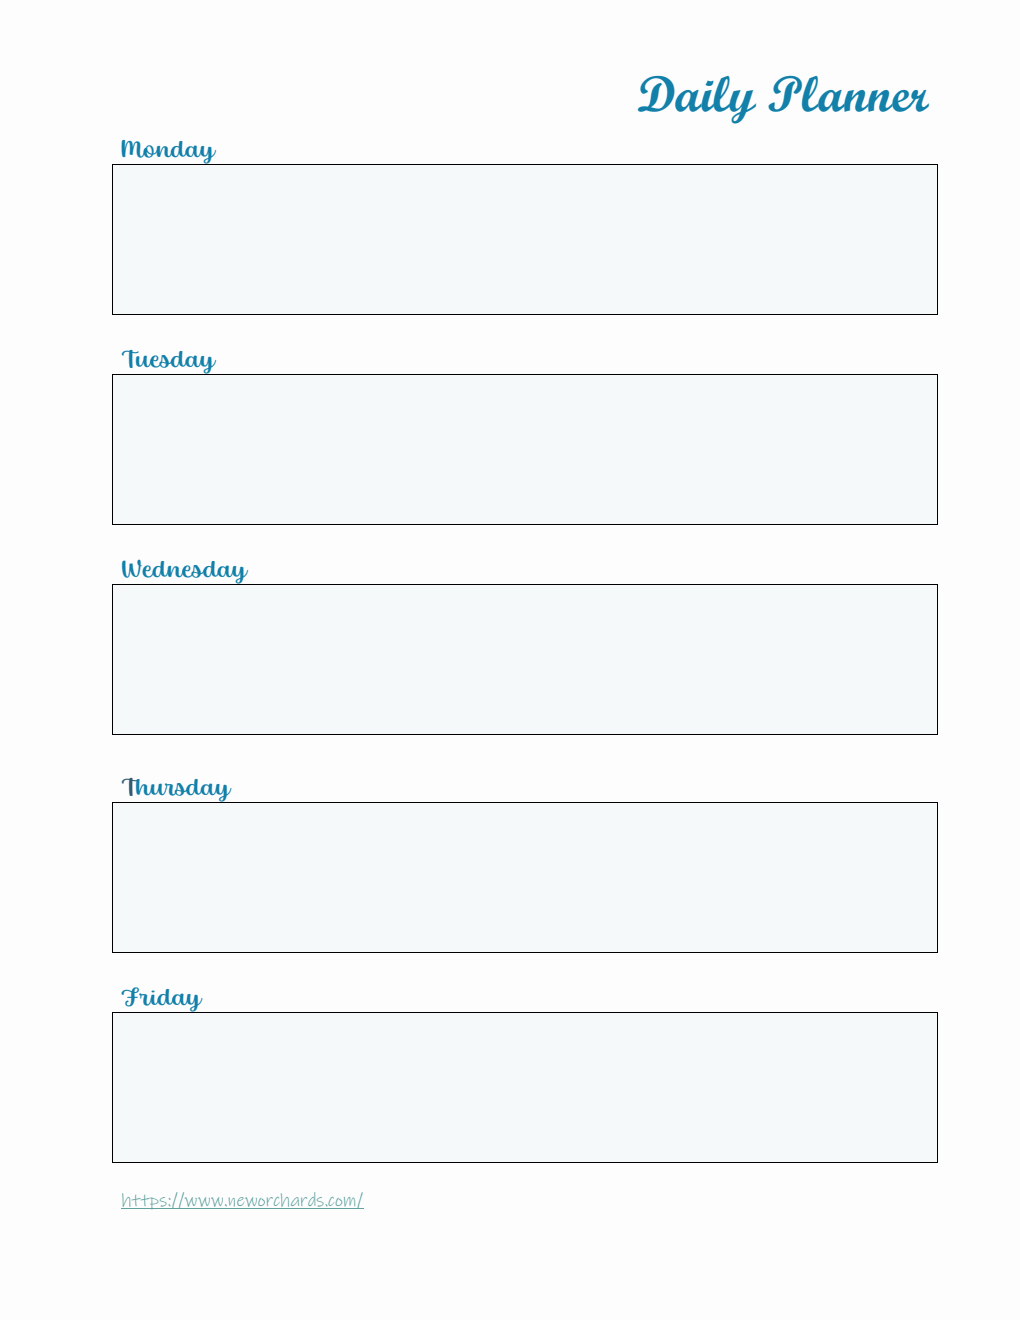 Daily Planner Template Downloadable in Word